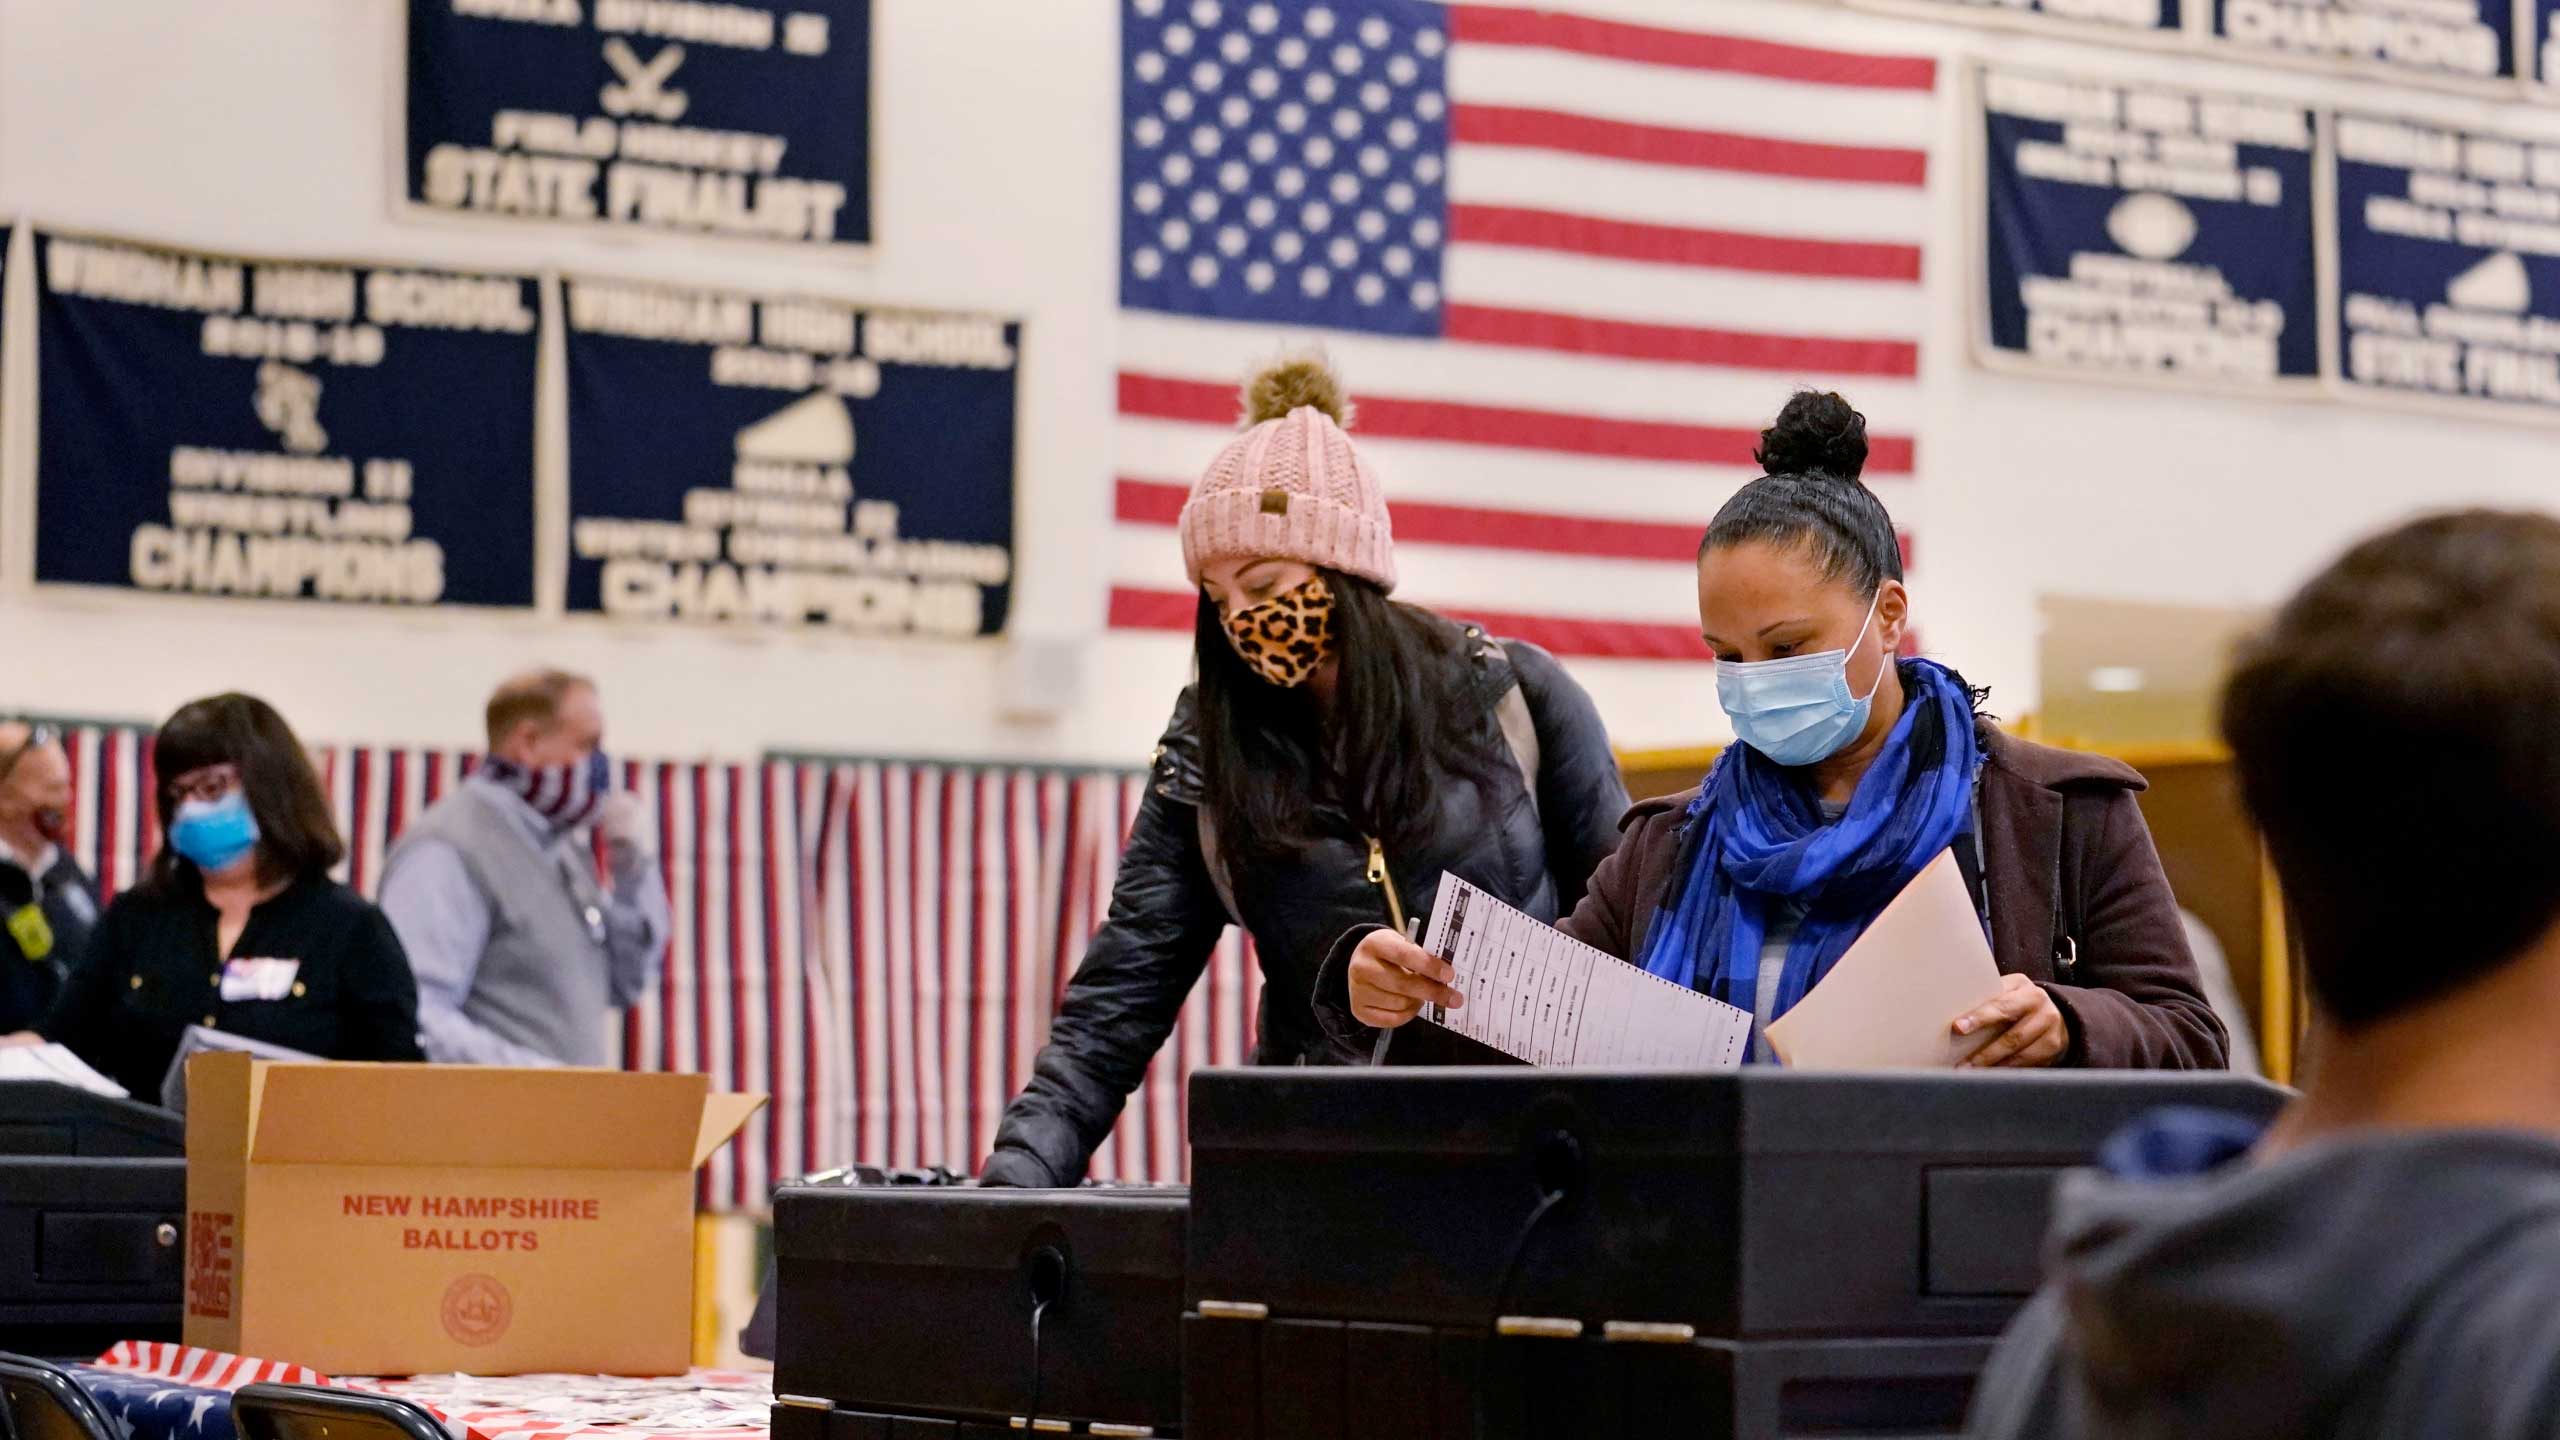 Two women, wearing protective masks due to the COVID-19 pandemic, cast their ballots at a polling station in Windham, New Hampshire. 